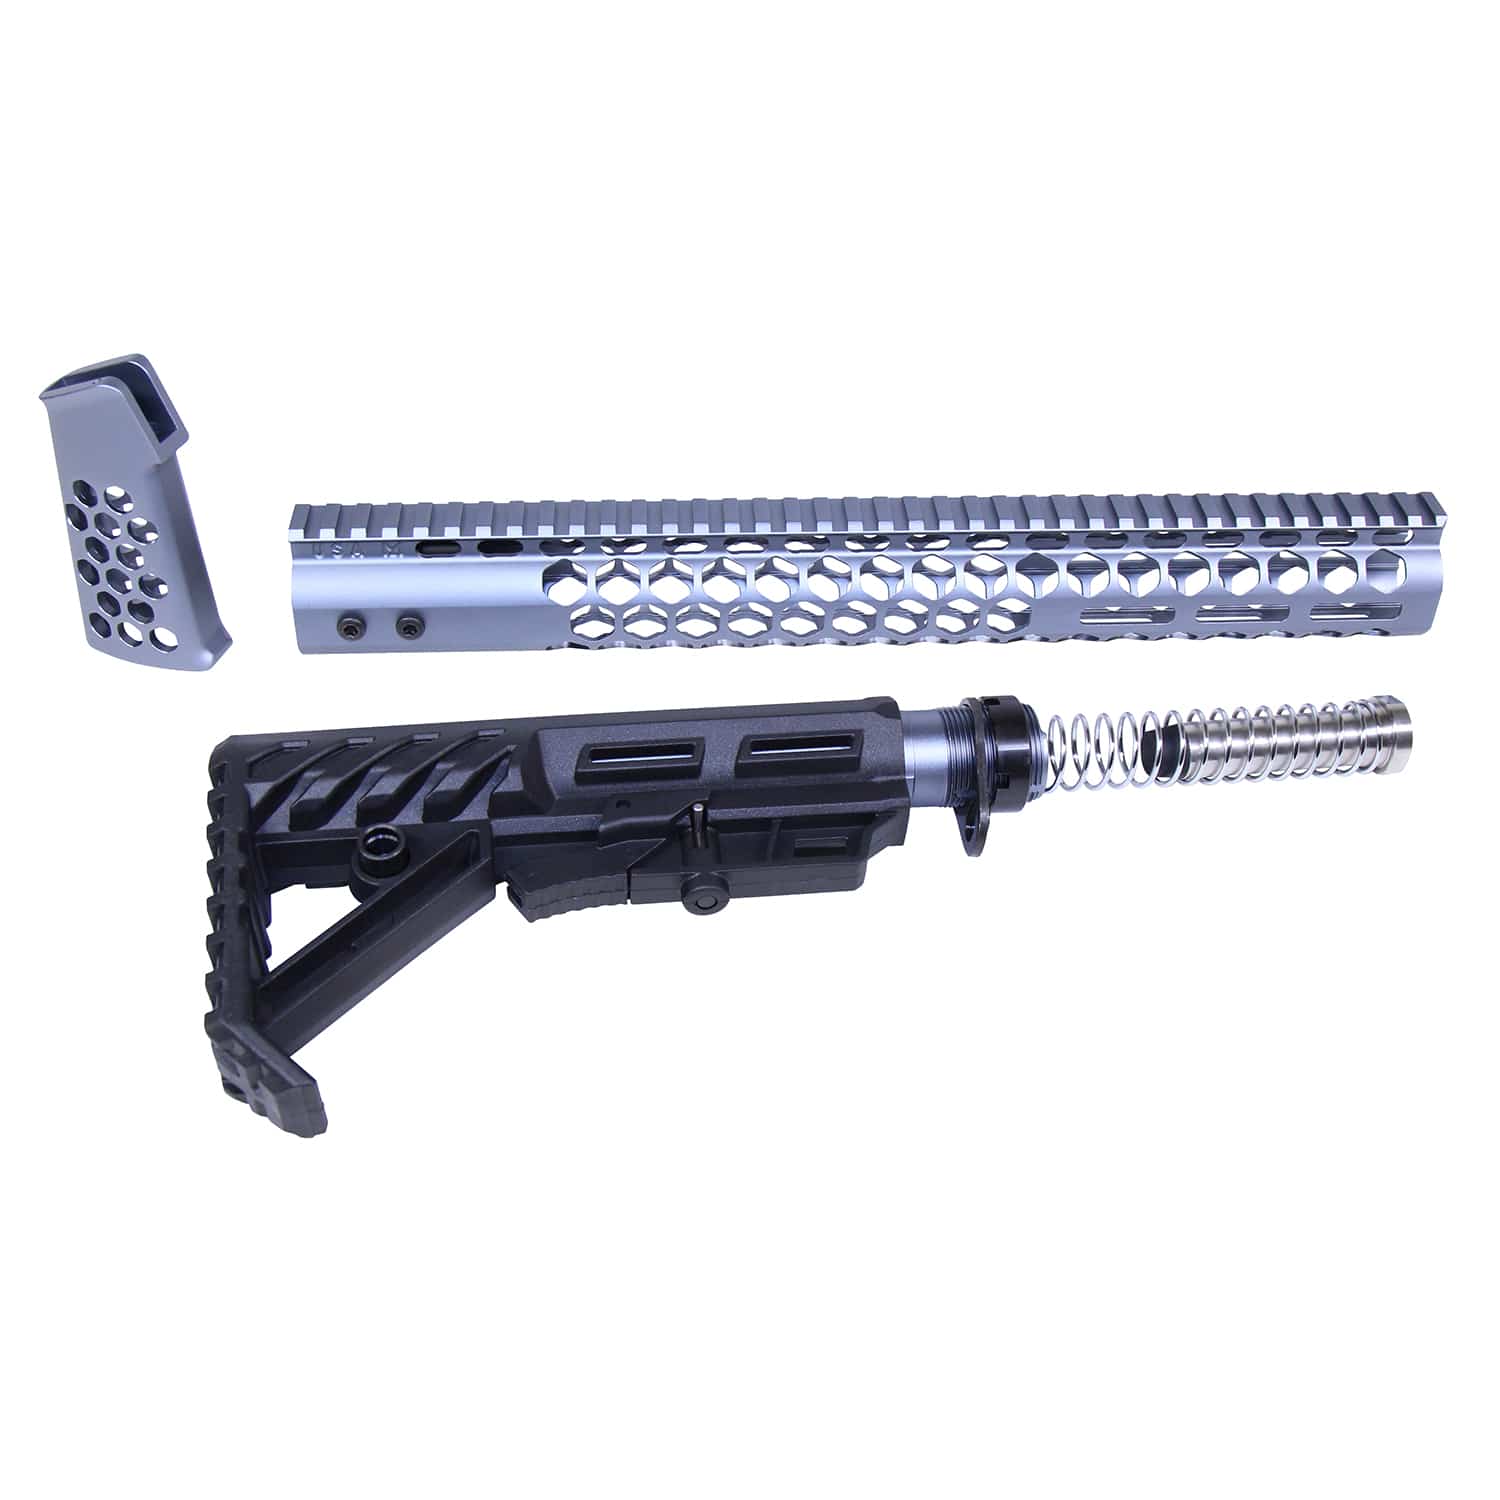 AR-15 Honeycomb Series Complete Rifle Furniture Set in Anodize Grey